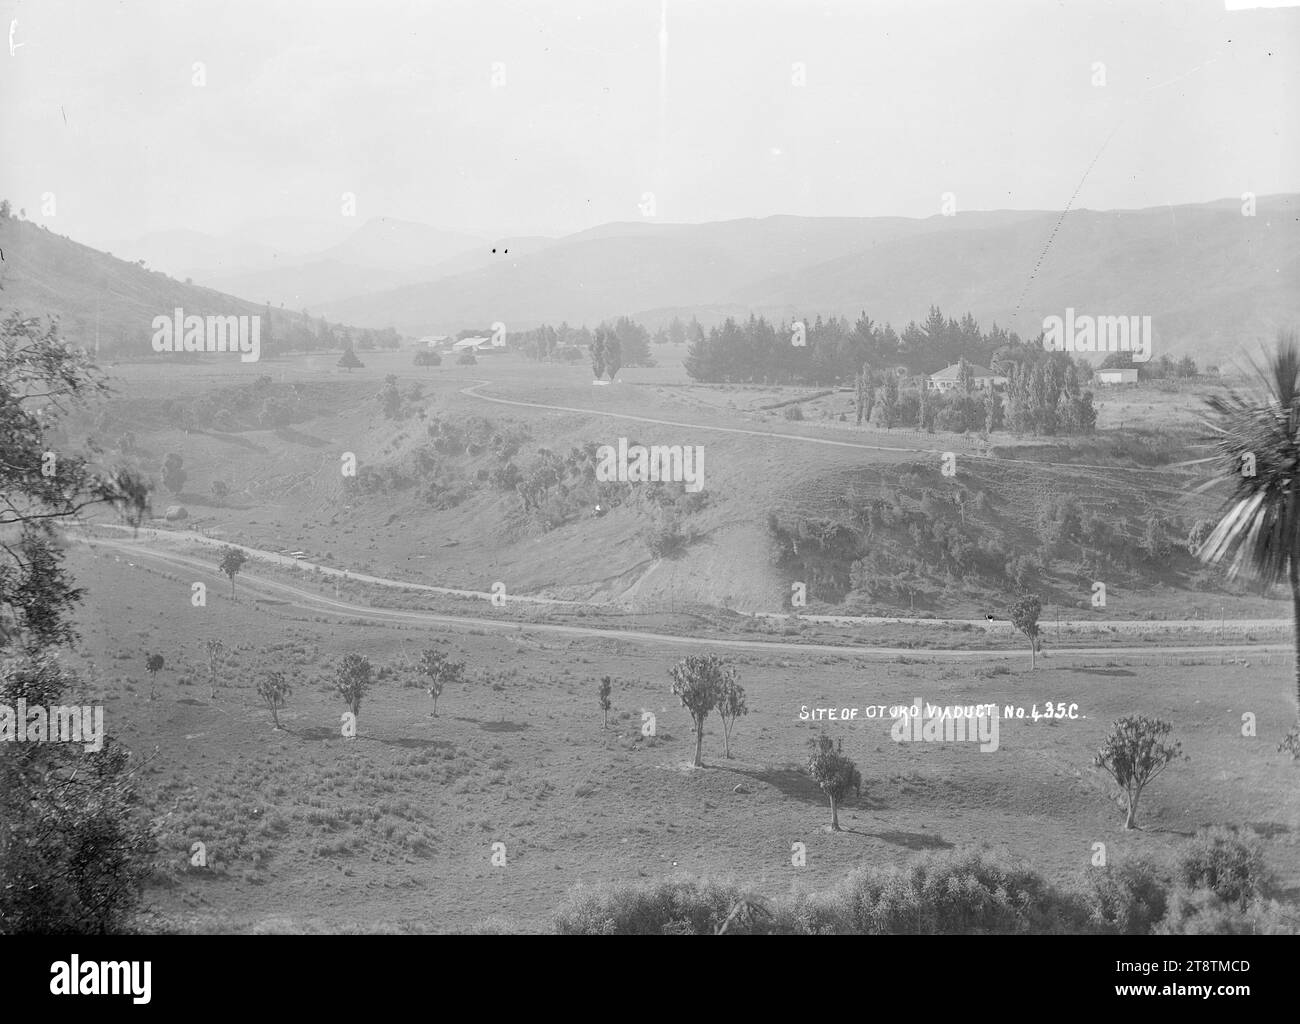 General view of the rural landscape near the settlement of Otoko showing the site of the viaduct, View of the settlement of Otoko, showing the rural landscape. There is a a road in the middle foreground running from left to right. Several farm houses and buildings are visible. Photographed between 1910-1930 Stock Photo